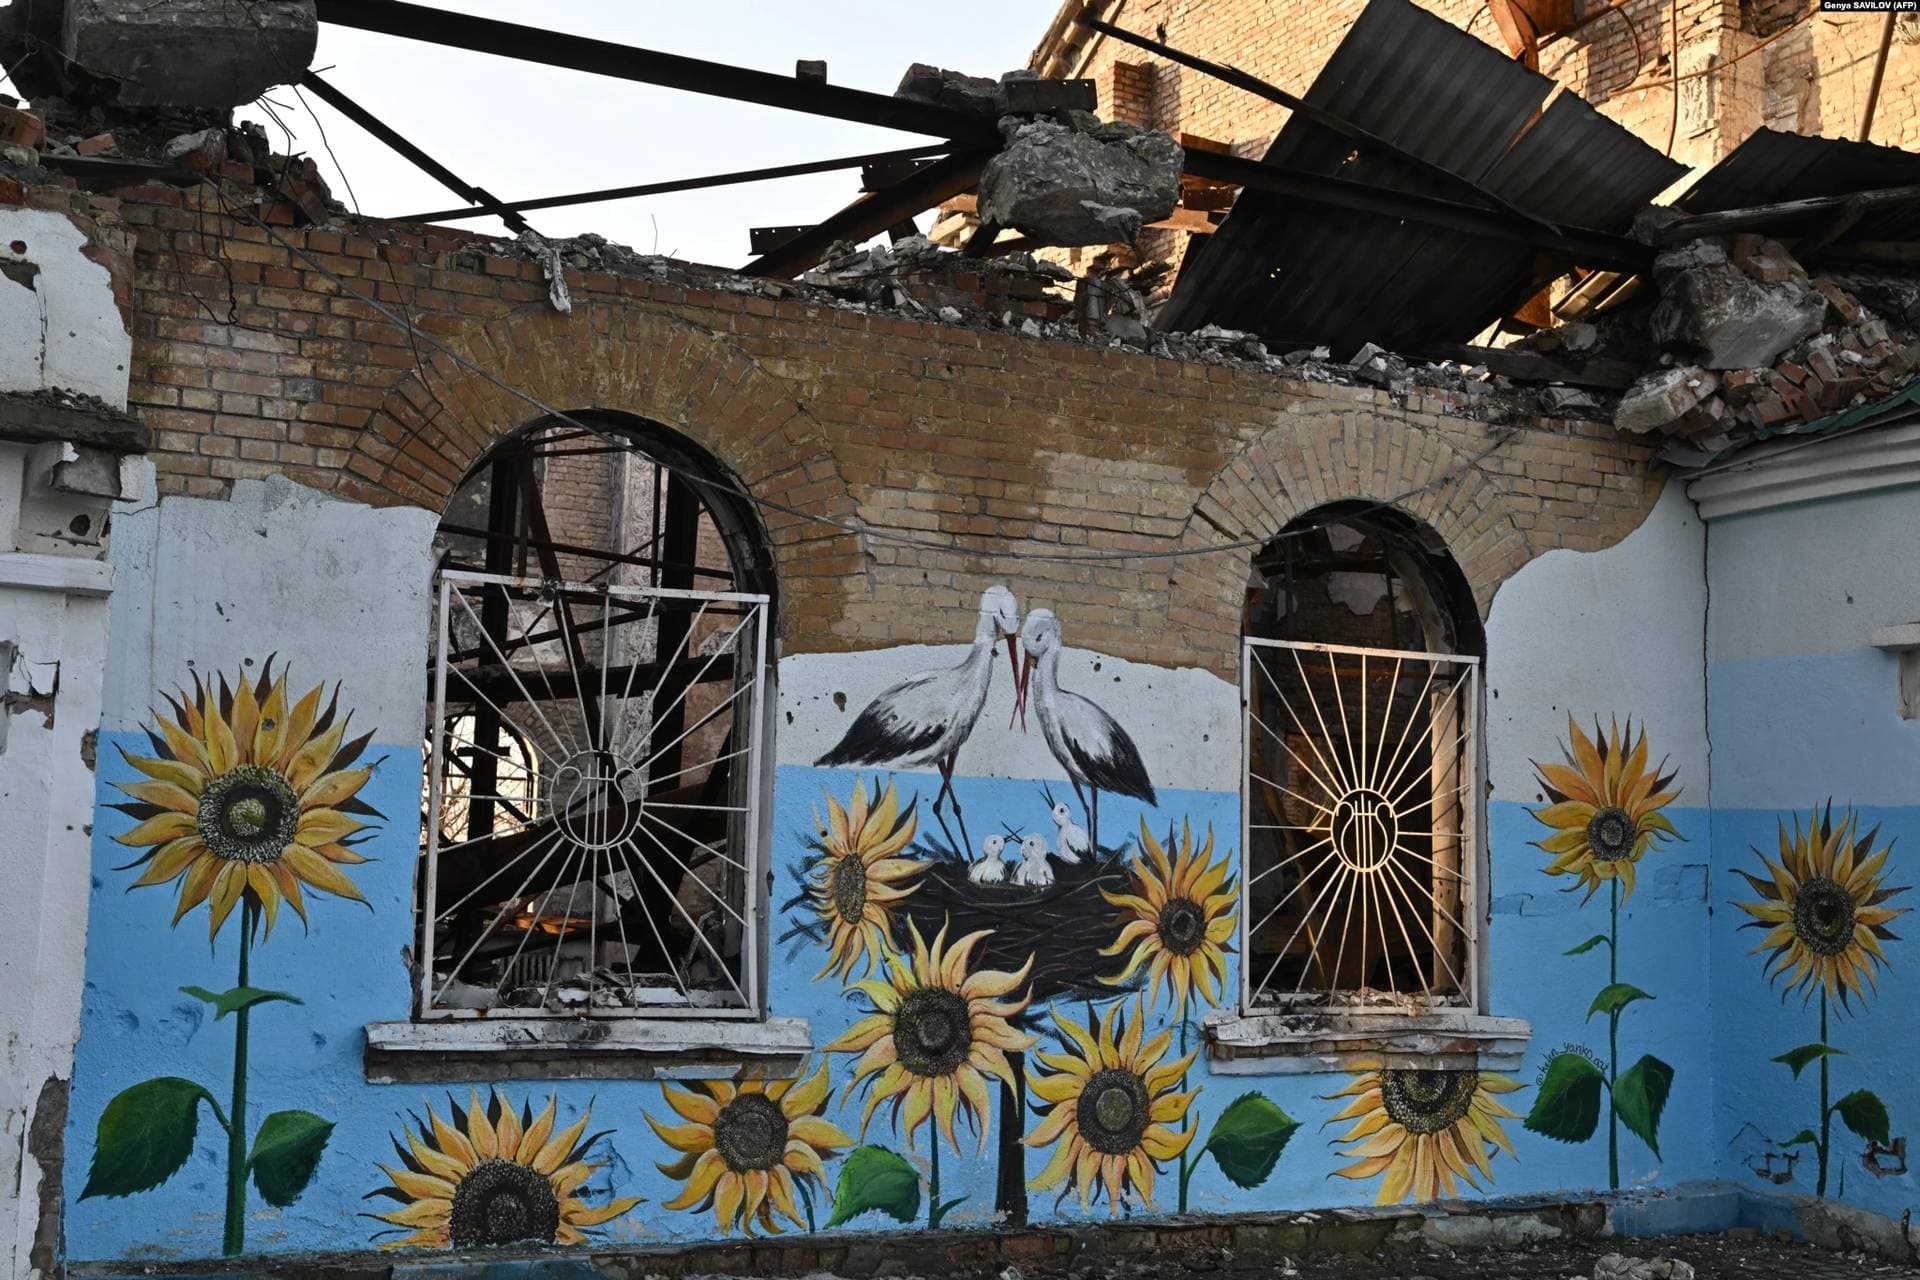 Sunflowers, a beloved symbol of Ukraine, and a family of storks adorn the shattered walls of Irpin's Central House of Culture